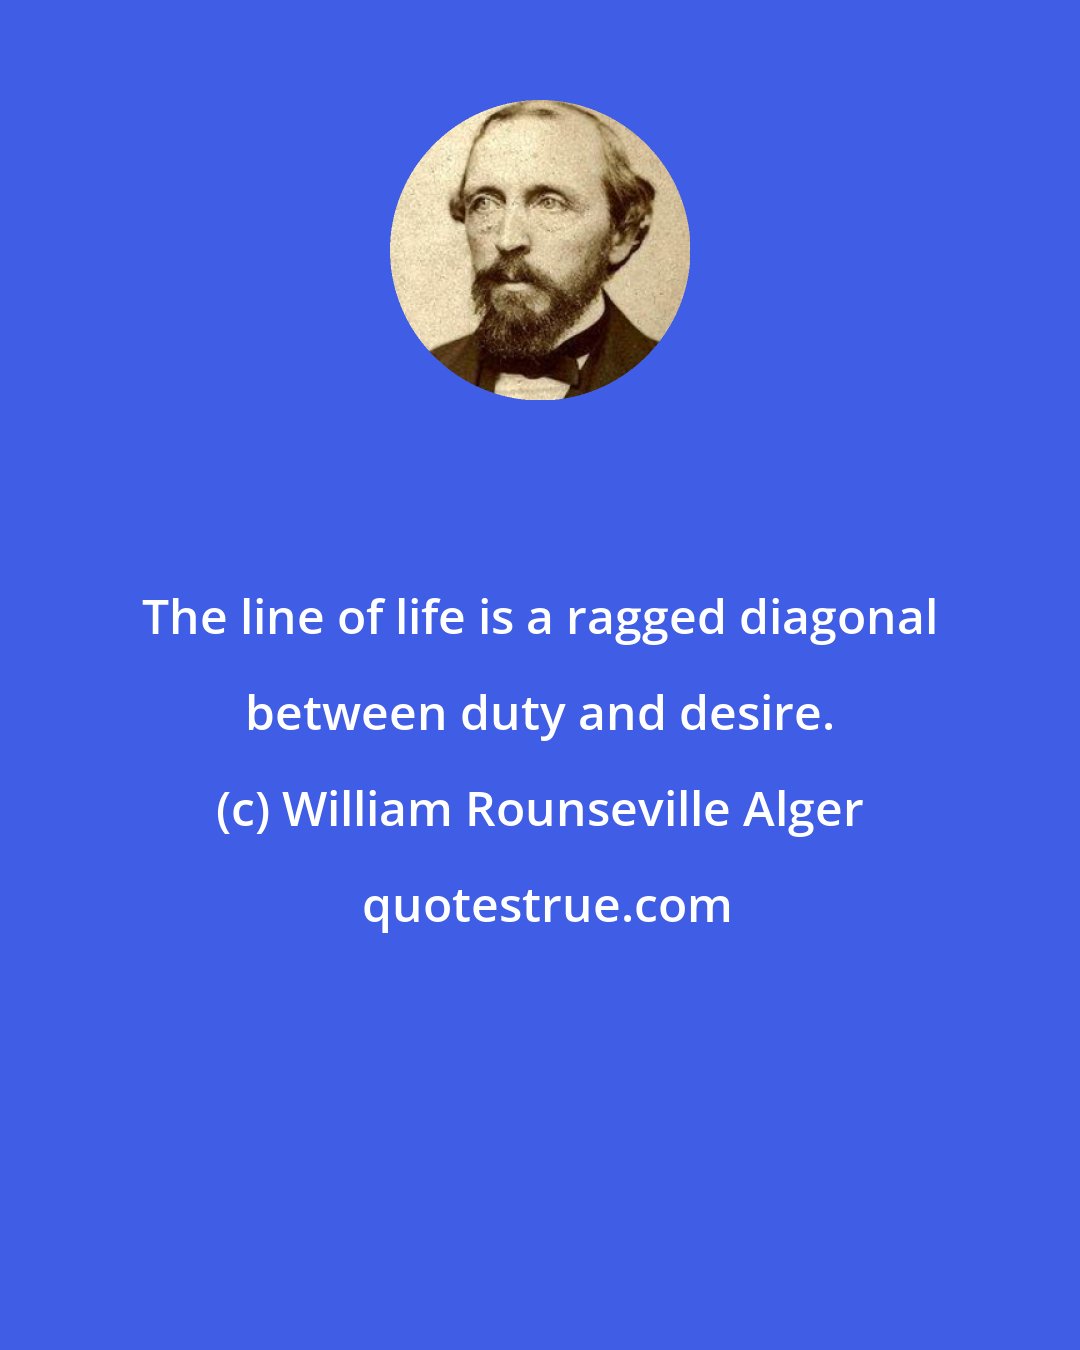 William Rounseville Alger: The line of life is a ragged diagonal between duty and desire.